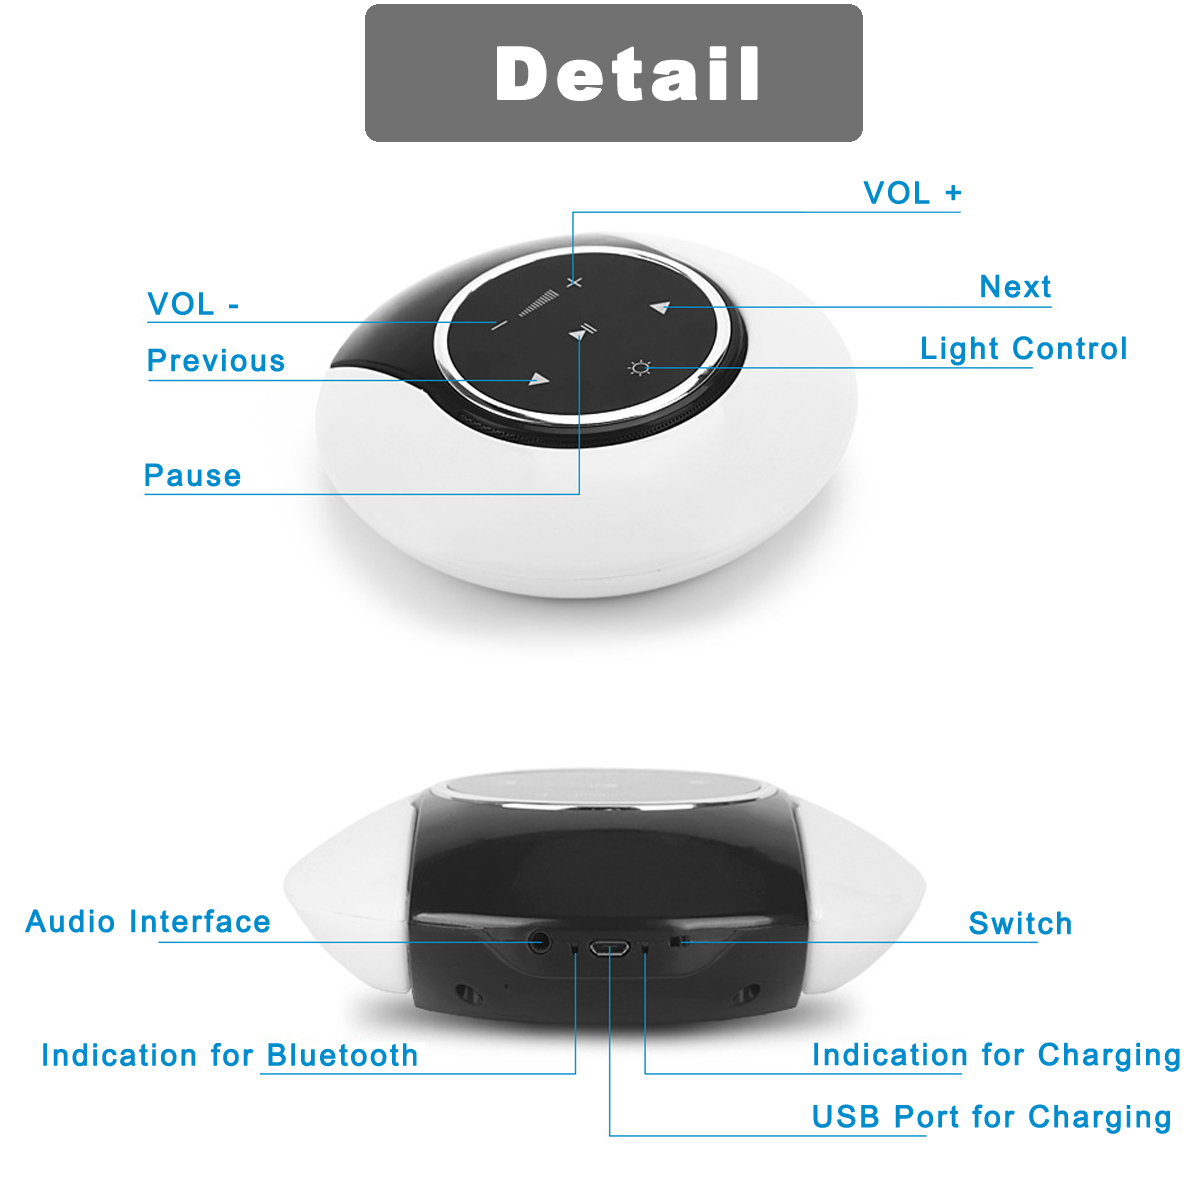 LED-Wireless-bluetooth-Speaker-180-Degree-Rotating-Lamp-Speakers-With-LED-Lights-1316222-10